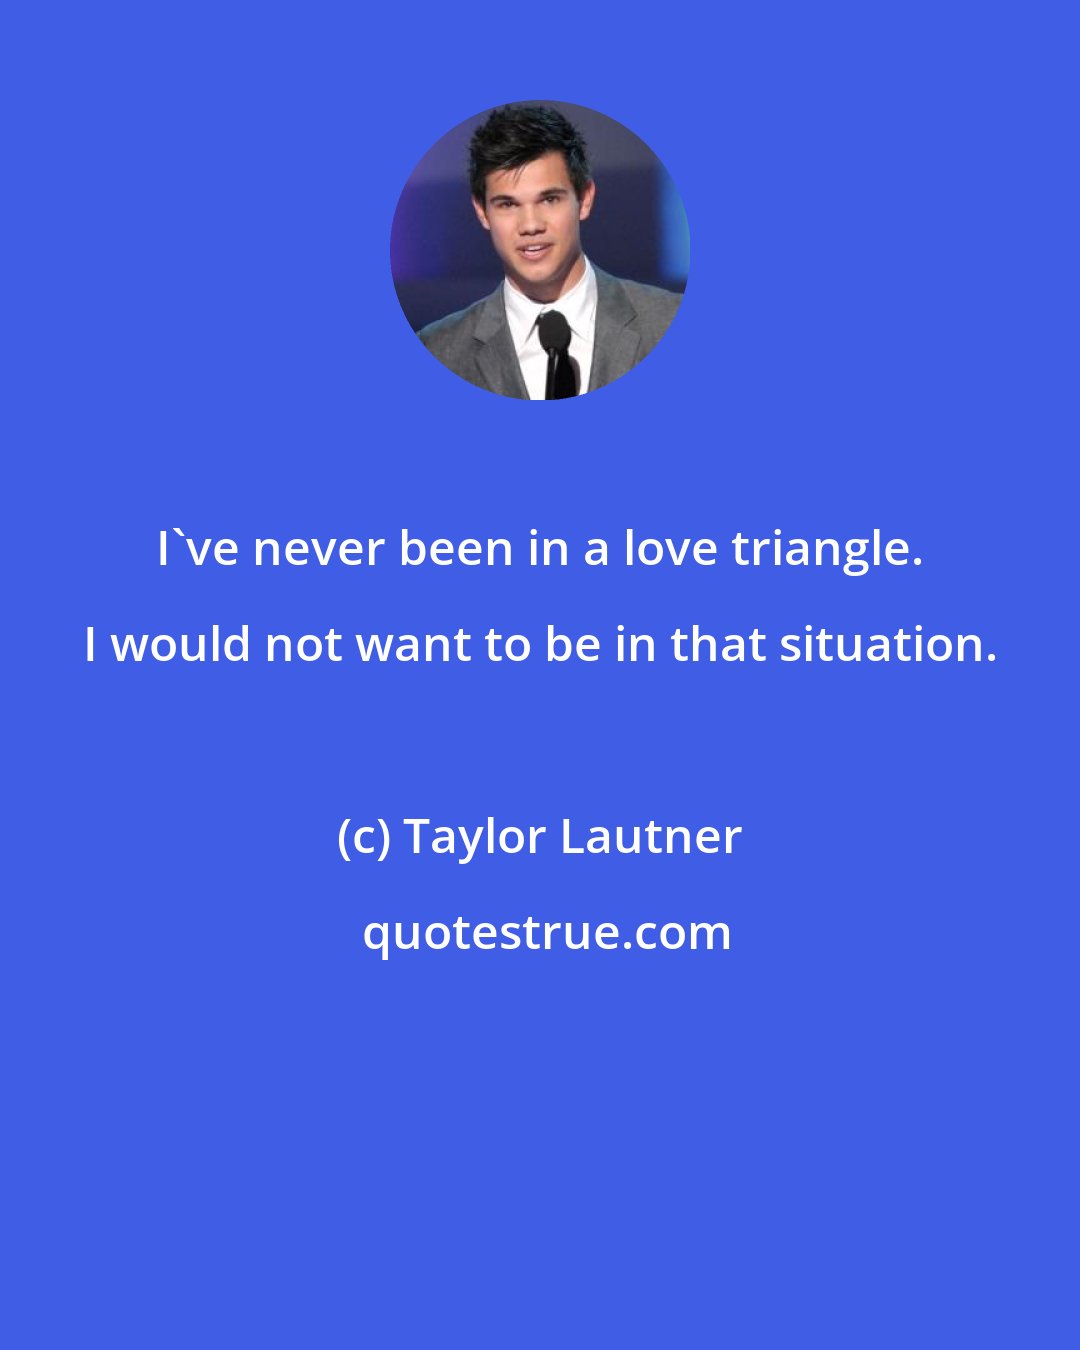 Taylor Lautner: I've never been in a love triangle. I would not want to be in that situation.